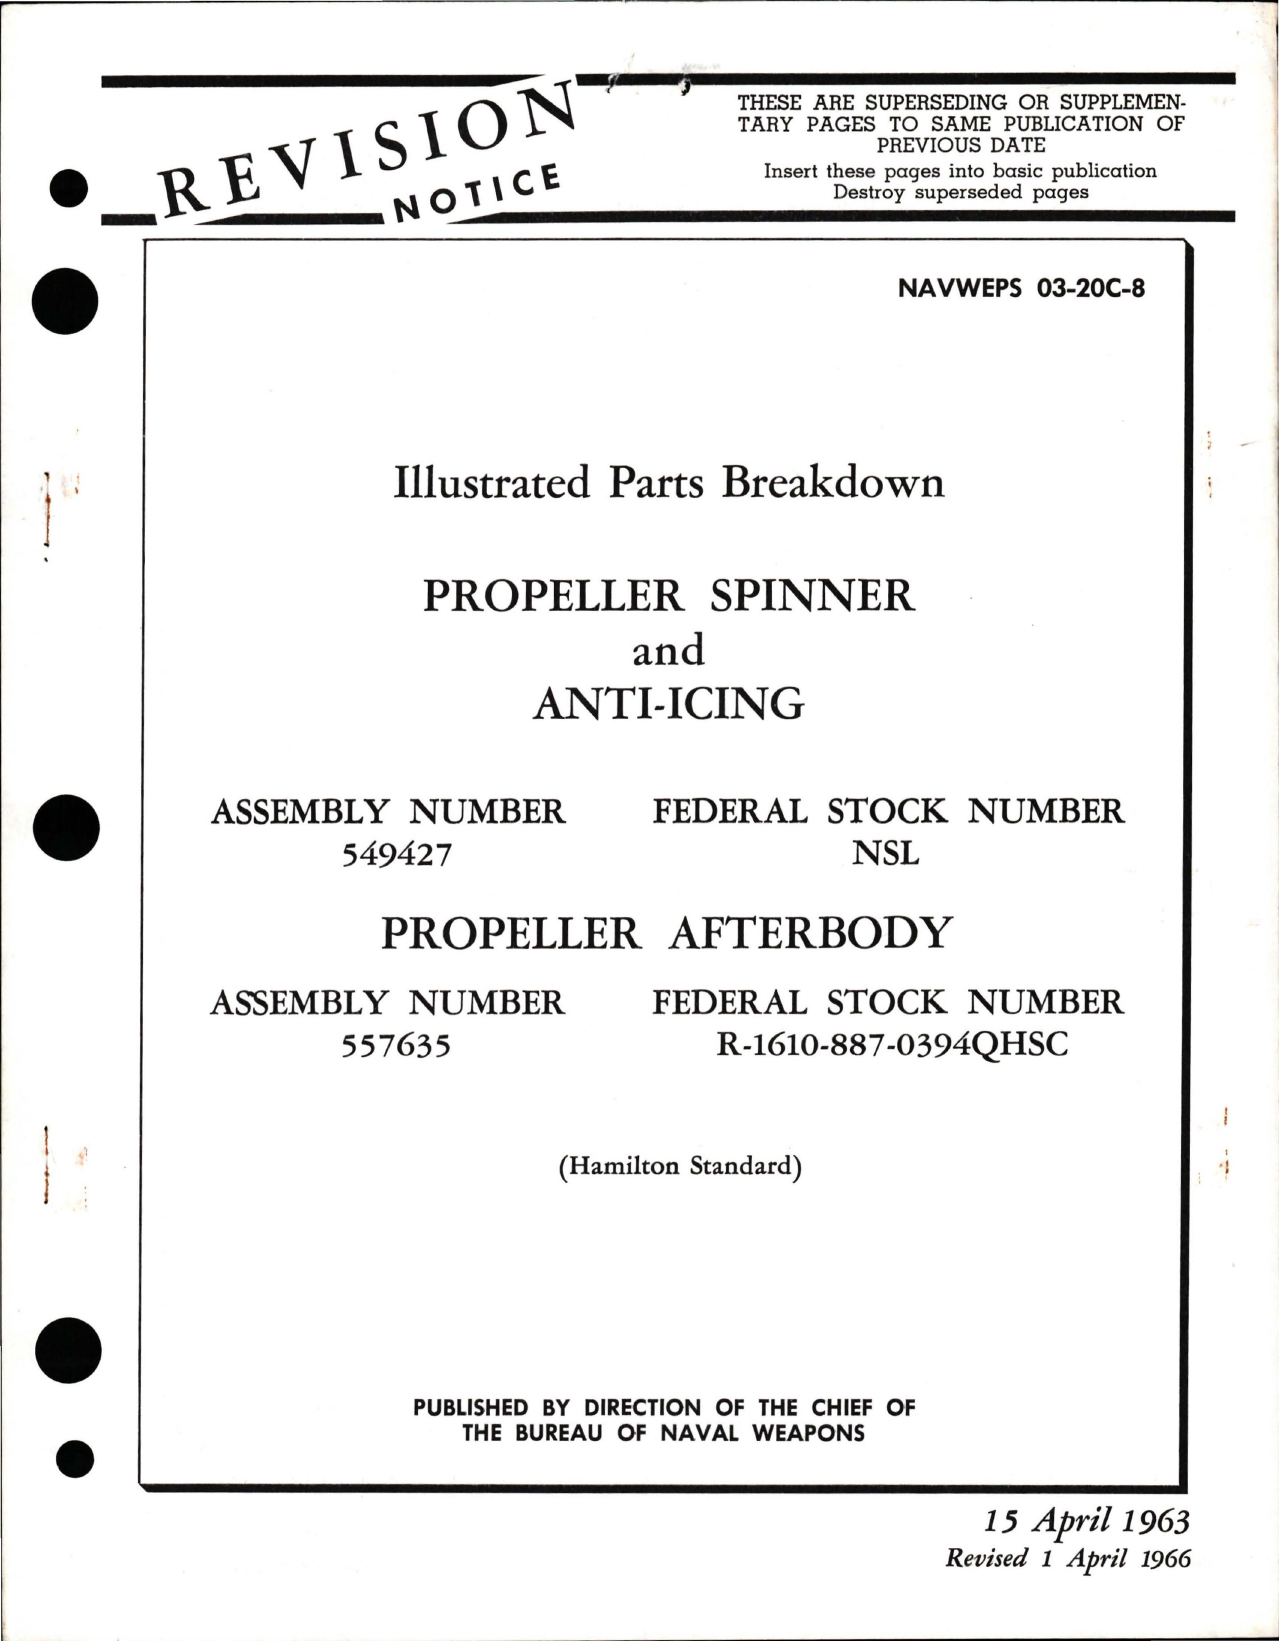 Sample page 1 from AirCorps Library document: Illustrated Parts Breakdown for Propeller Spinner, Anti-Icing, and Propeller Afterbody